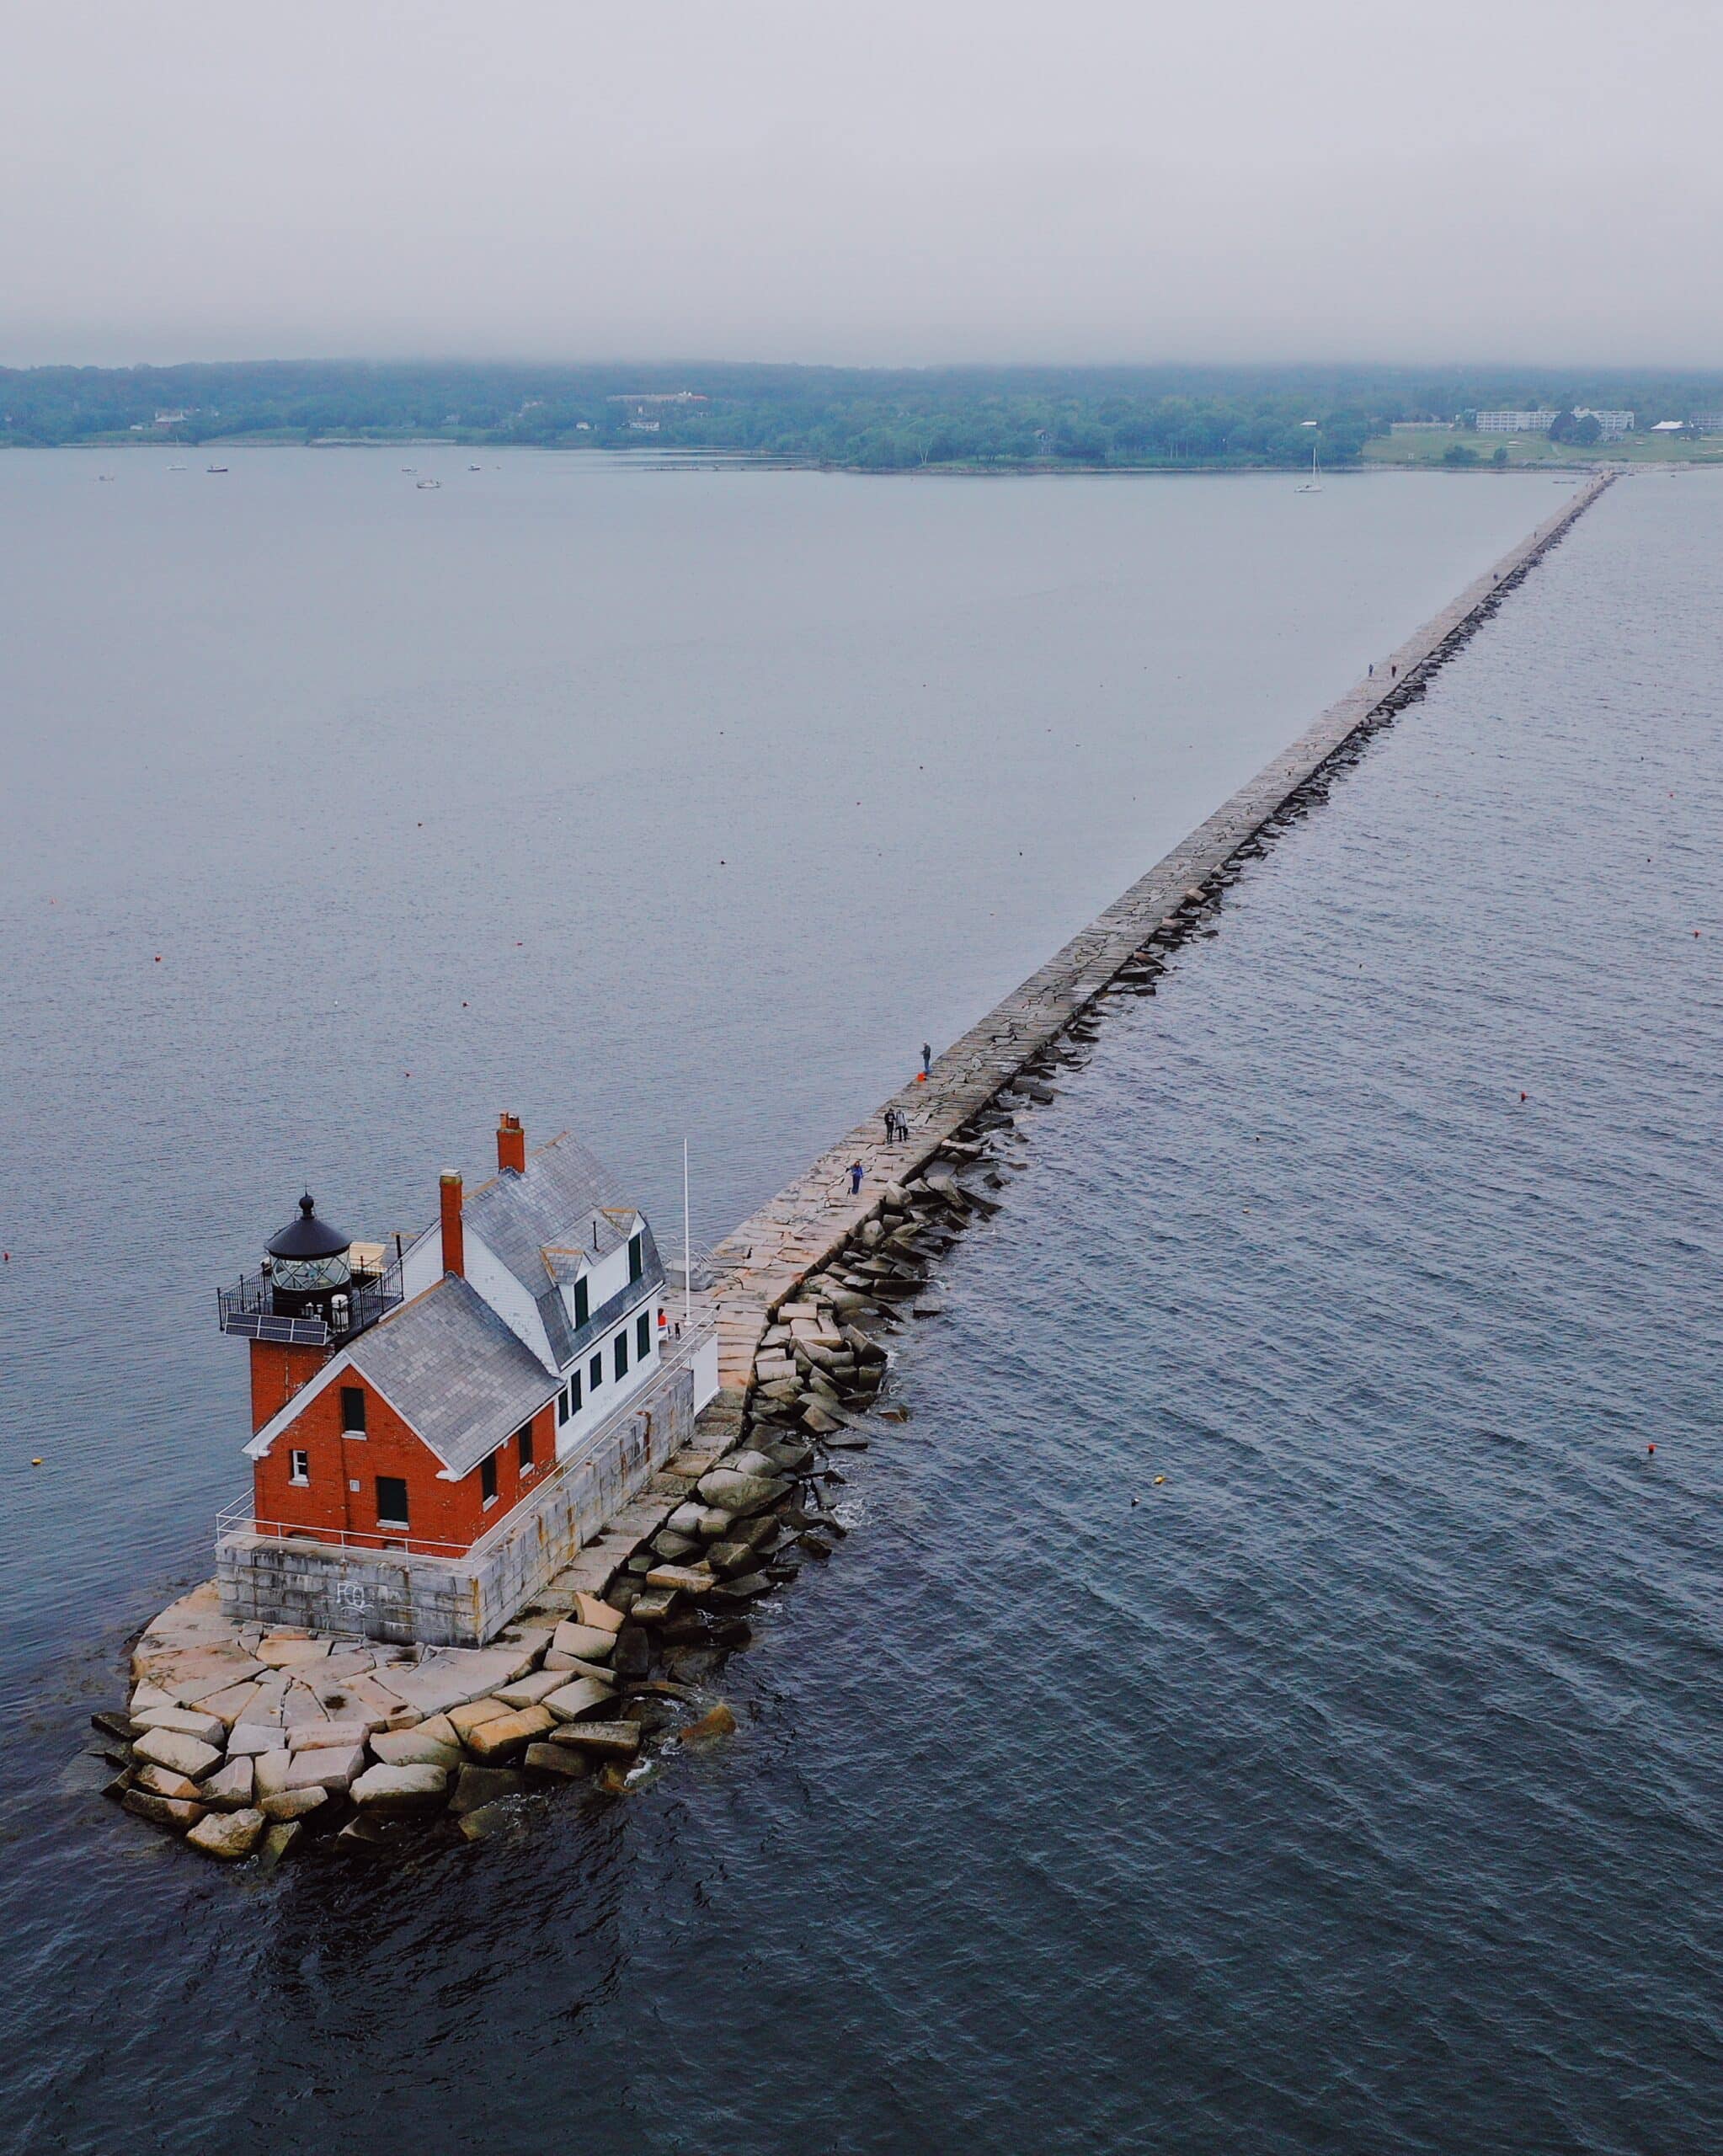 Drone shot of a lighthouse on a pier off the New England coast taken on an Escape Camper Van road trip.